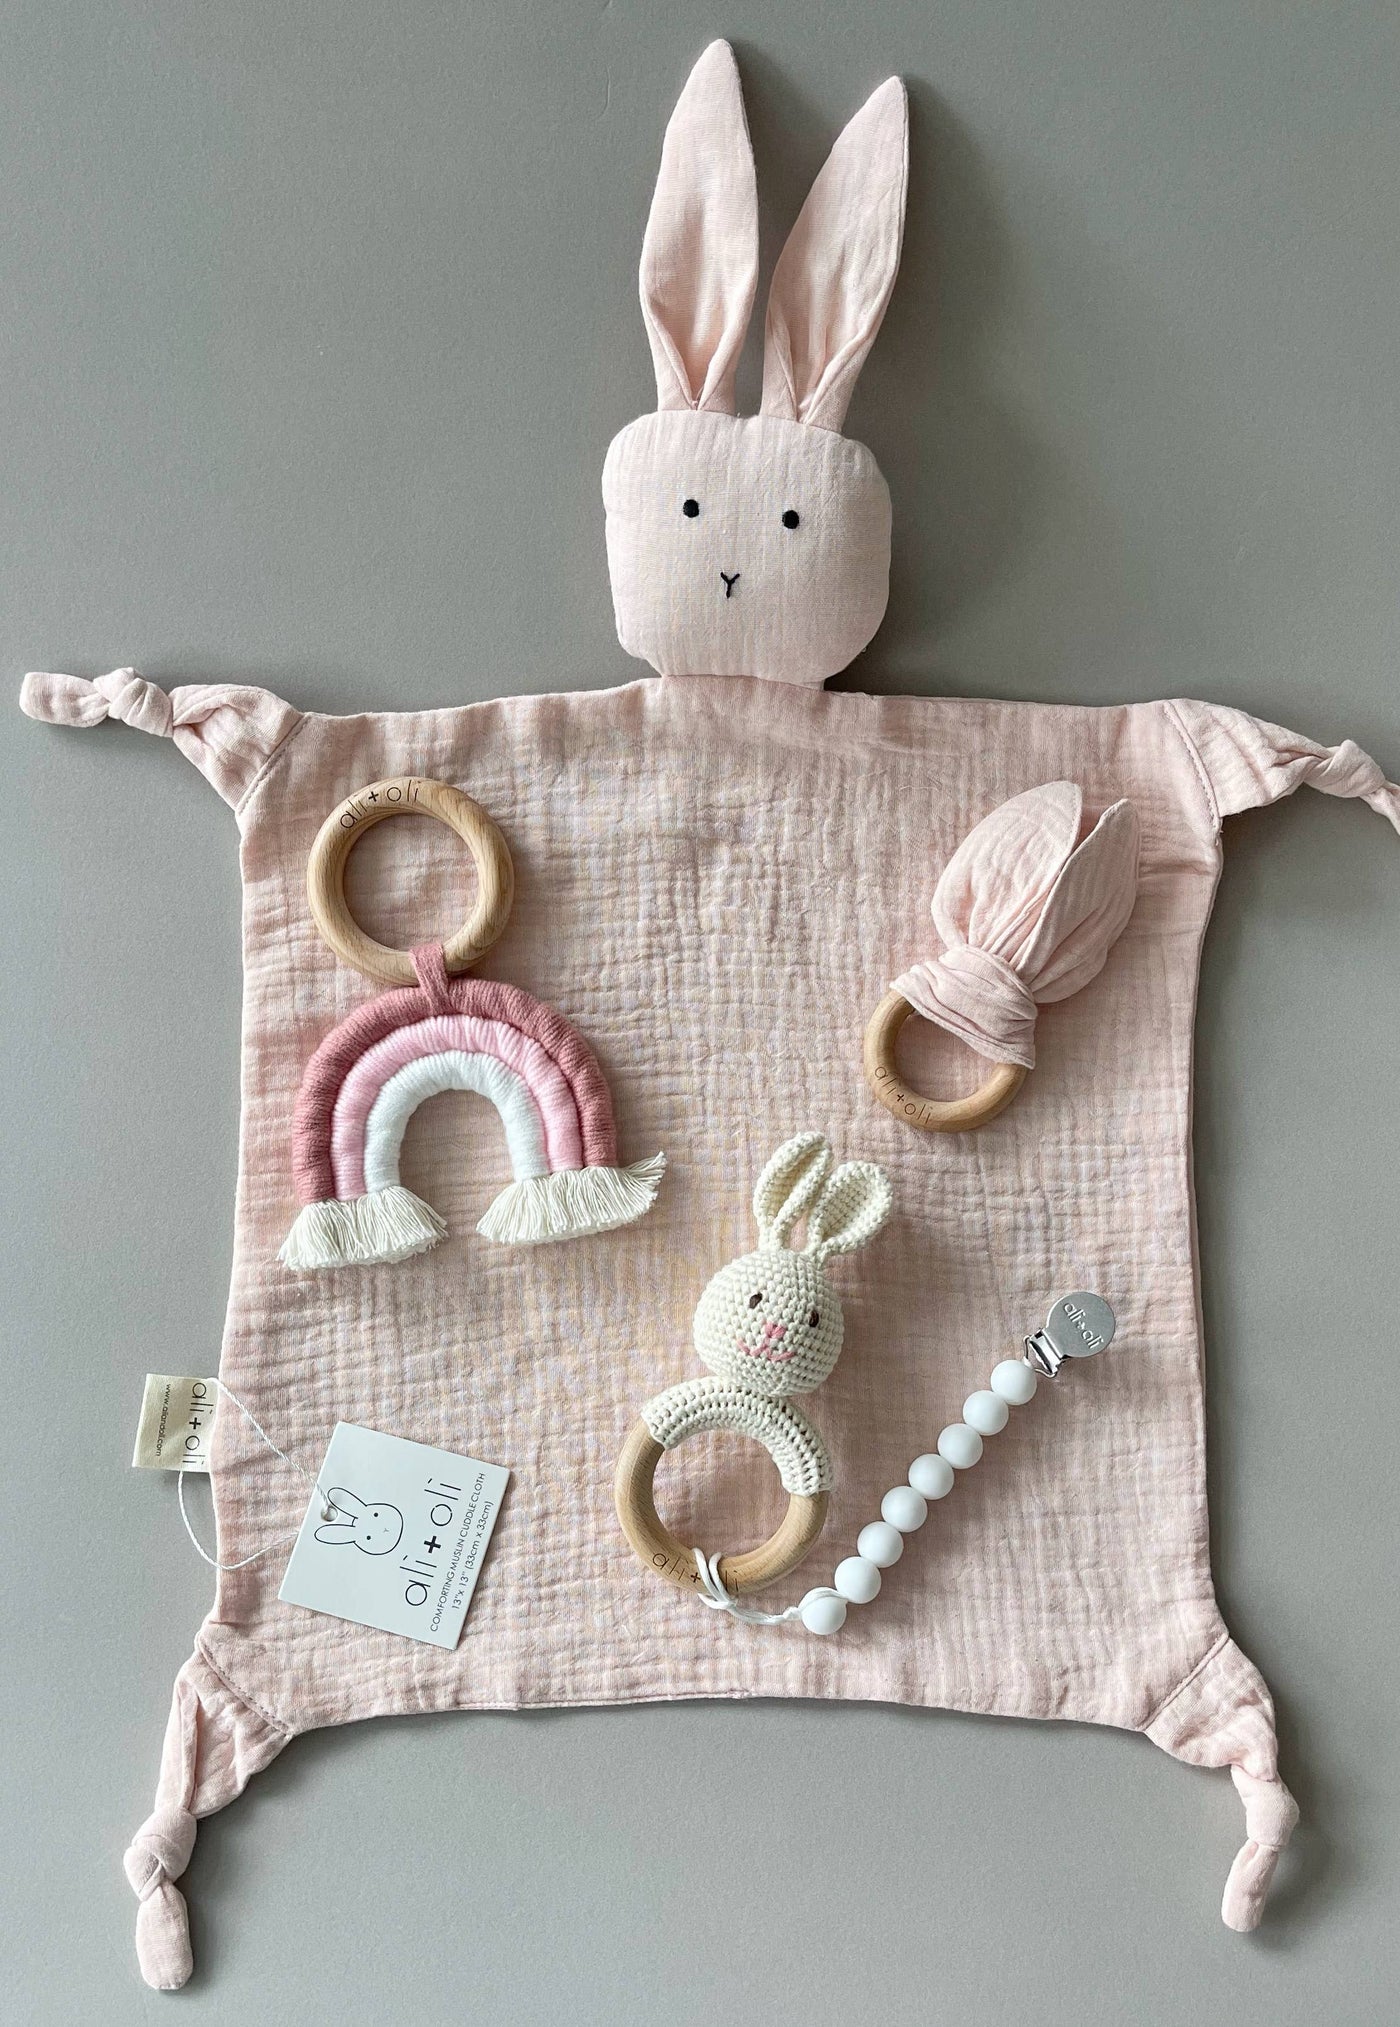 Cuddle Security Blanket Soft Muslin Cotton - Bunny (Pink)